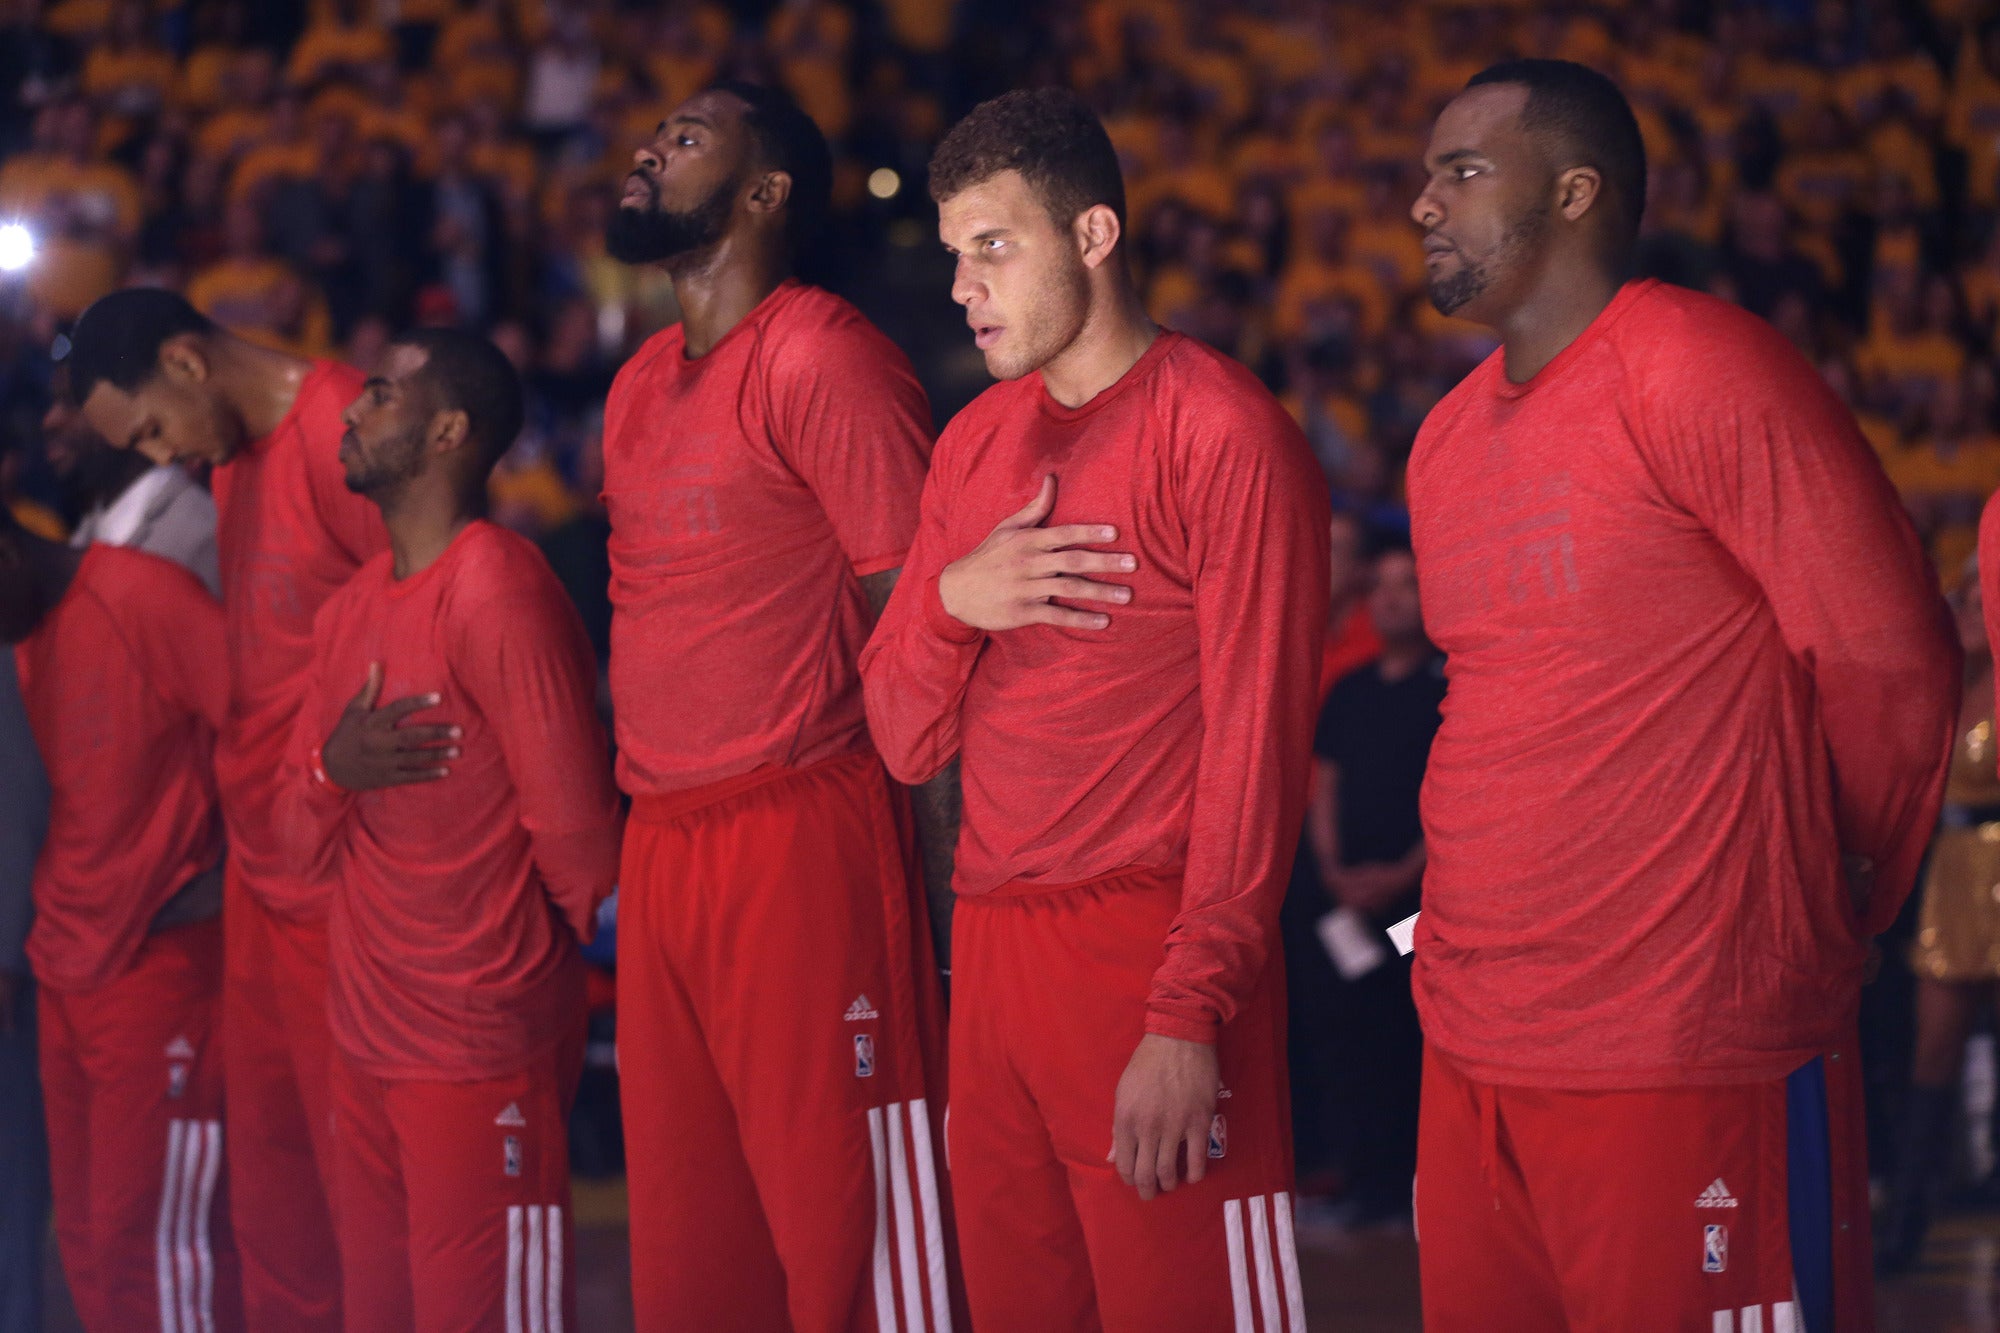 ESSENCE Poll: What Should NBA Players Do in Response to Clippers Controversy?